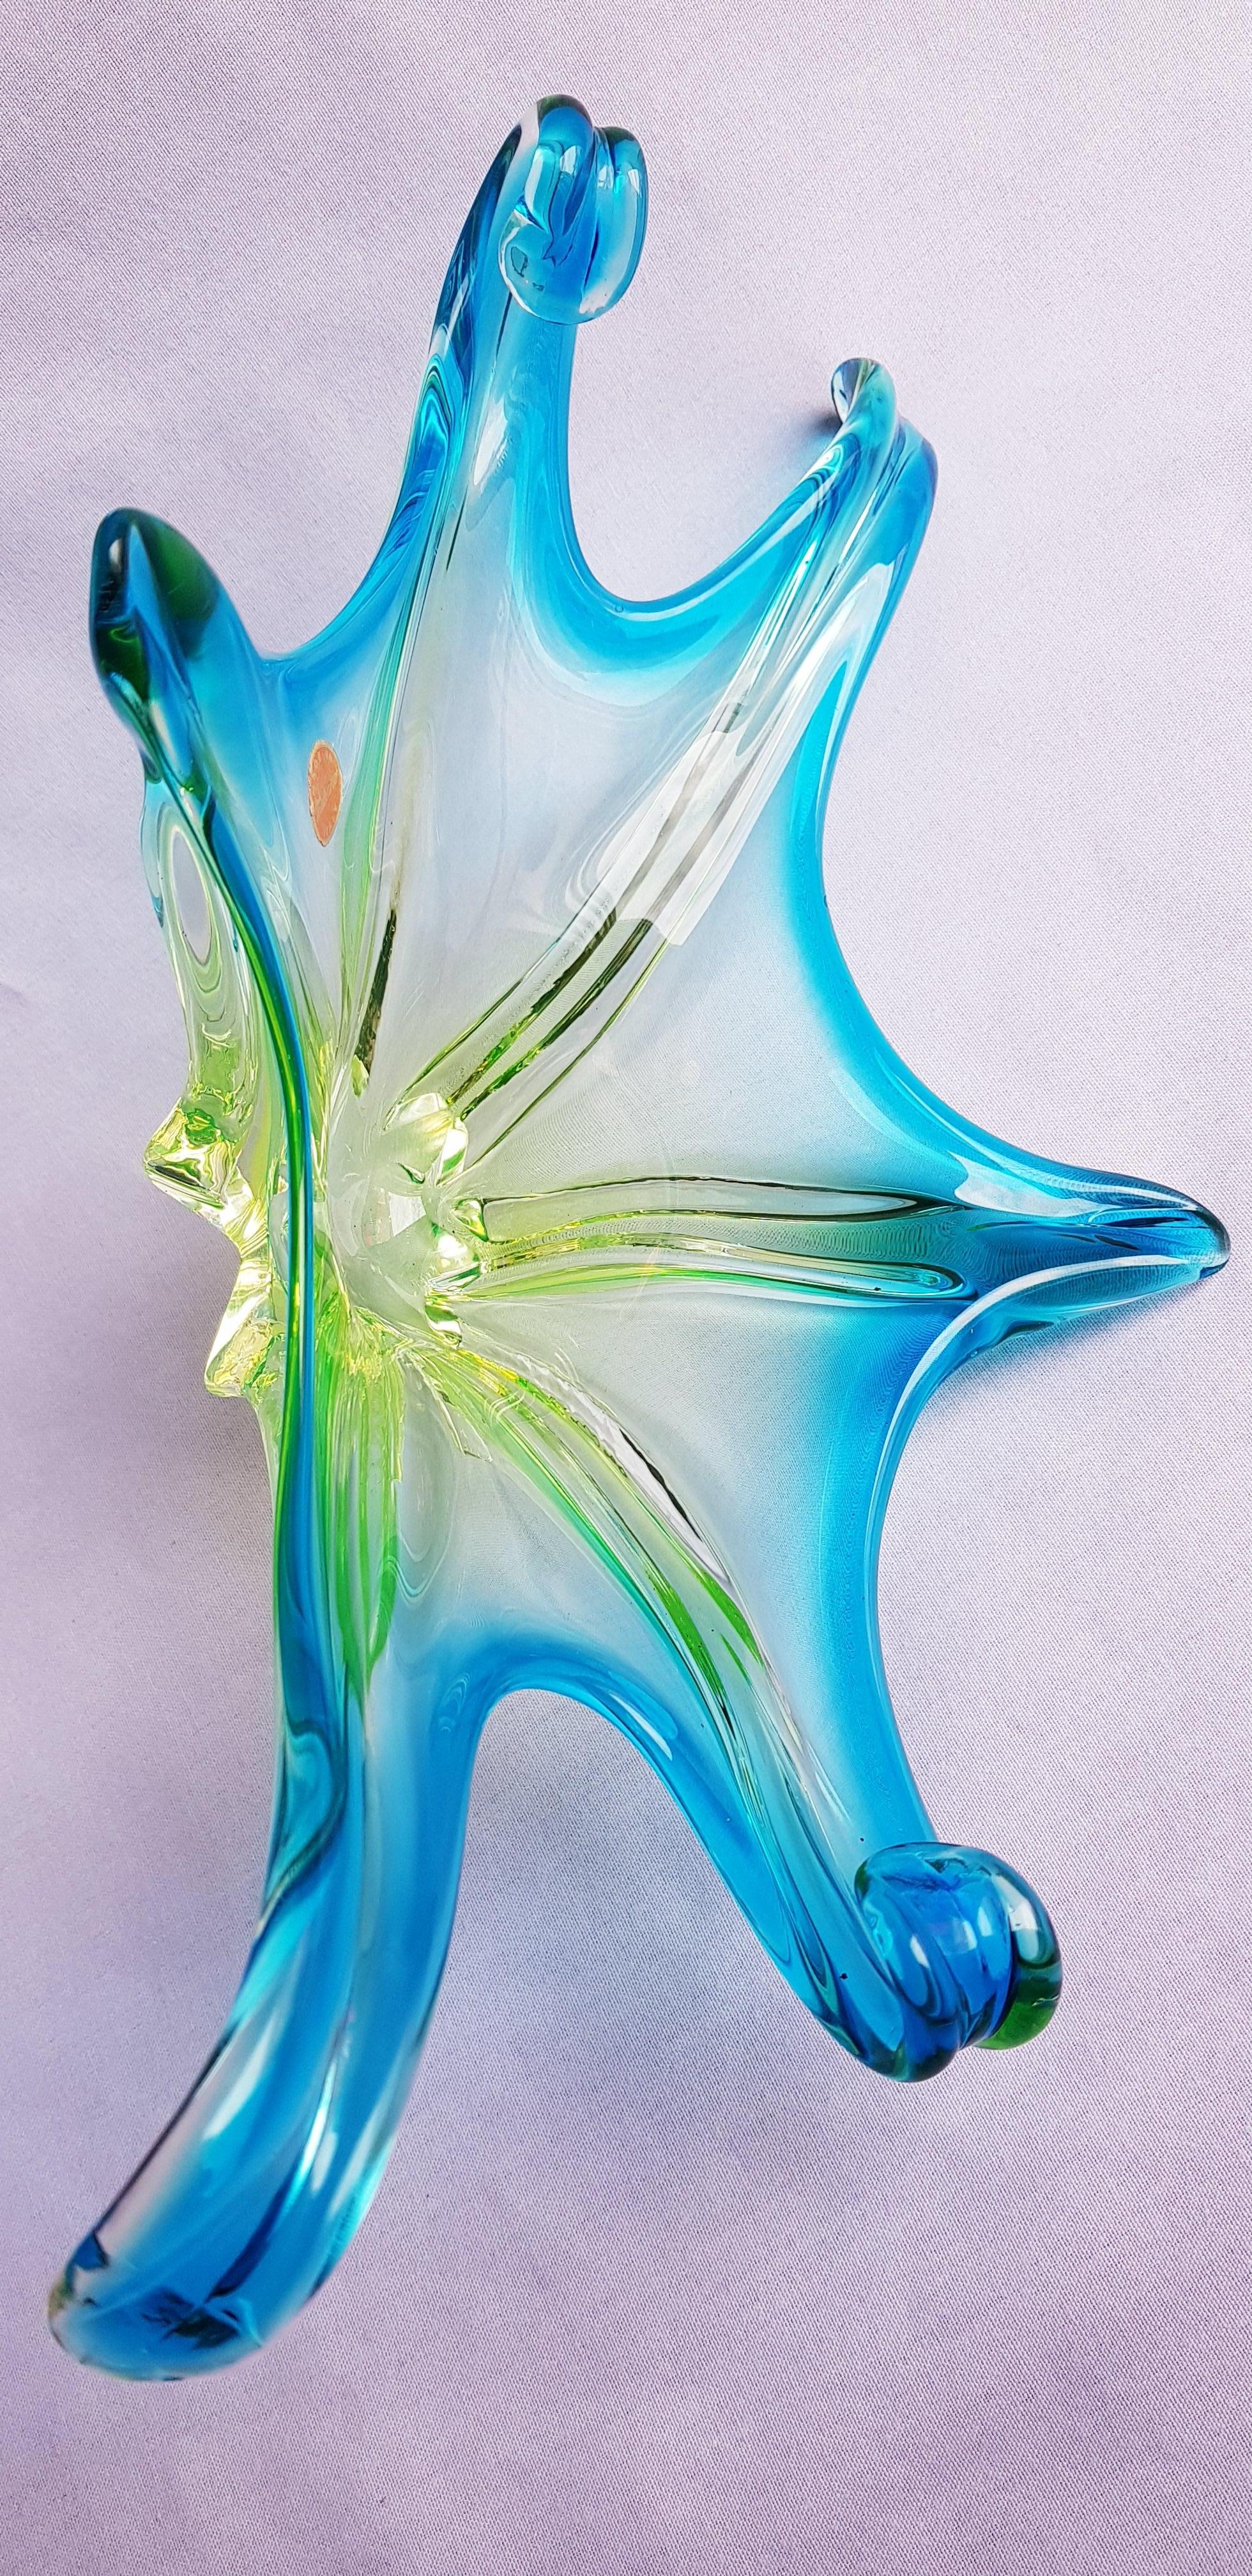 Hand-Crafted Middle of Century Extralarge Murano Glass Somerso Uranium Centerpiece For Sale